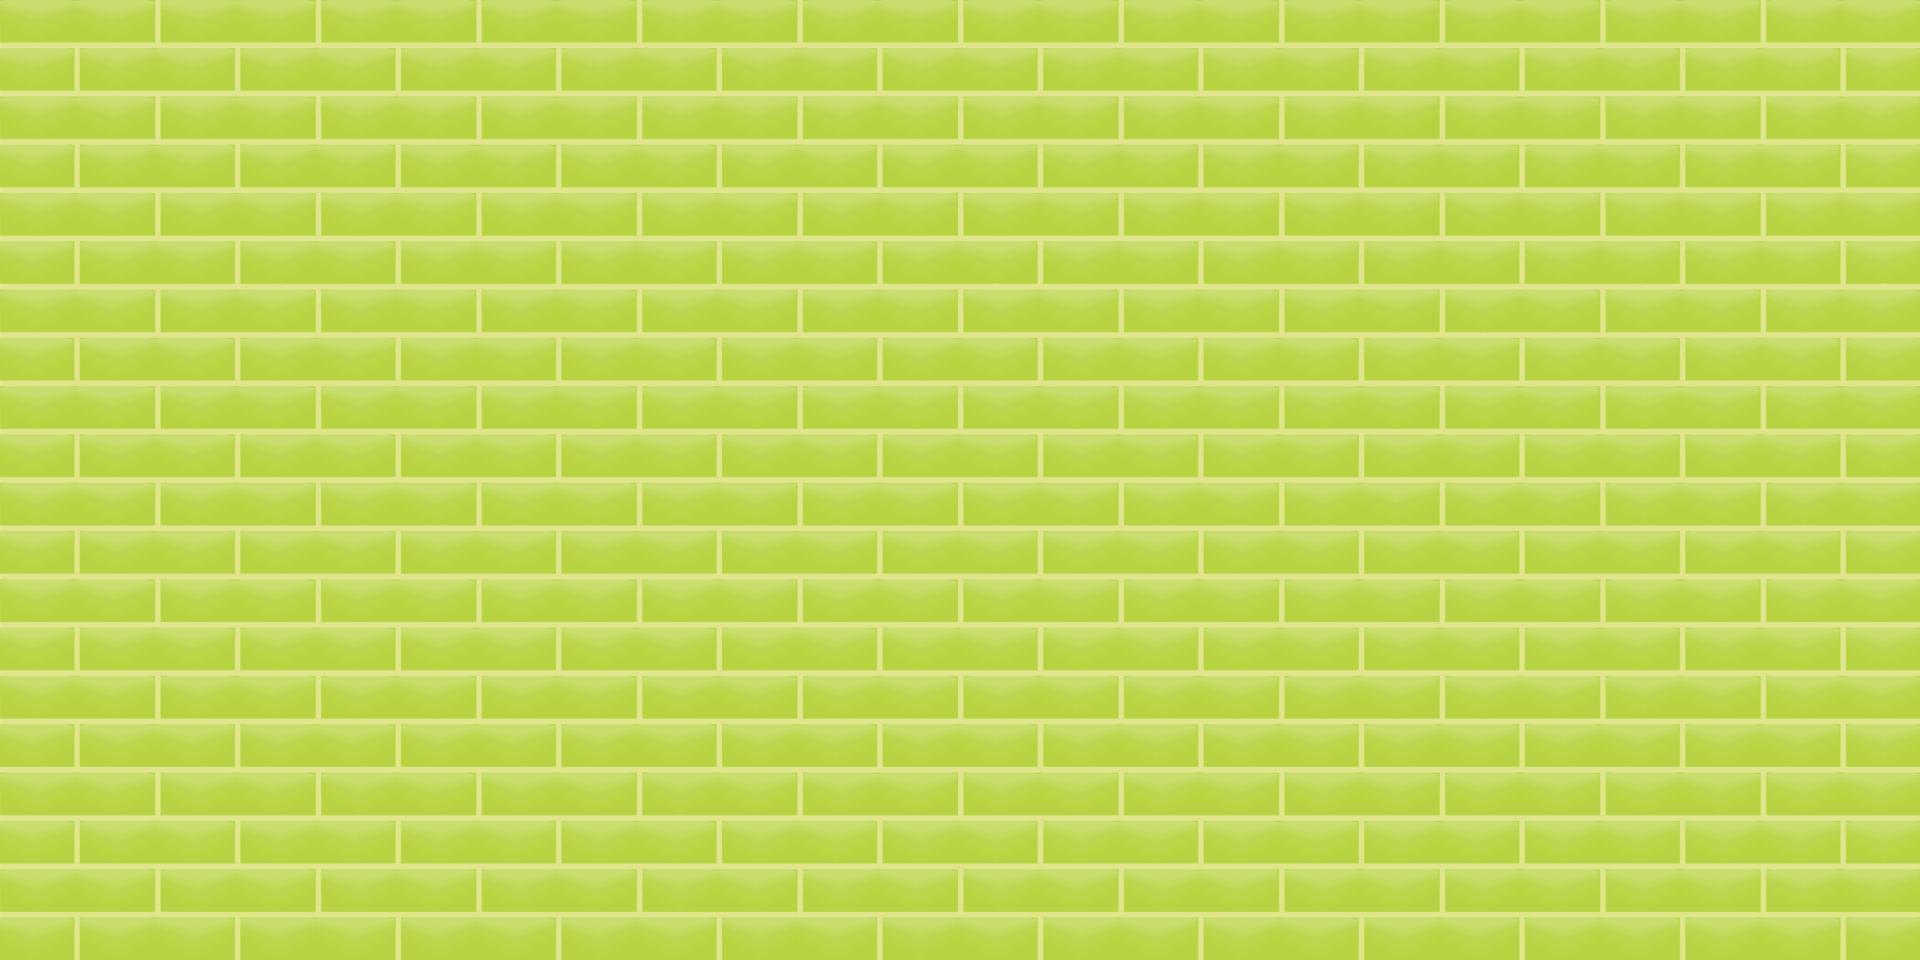 Abstract background green colorful brick wall building concrete texture wallpaper backdrop template pattern seamless vintage vector and illustration